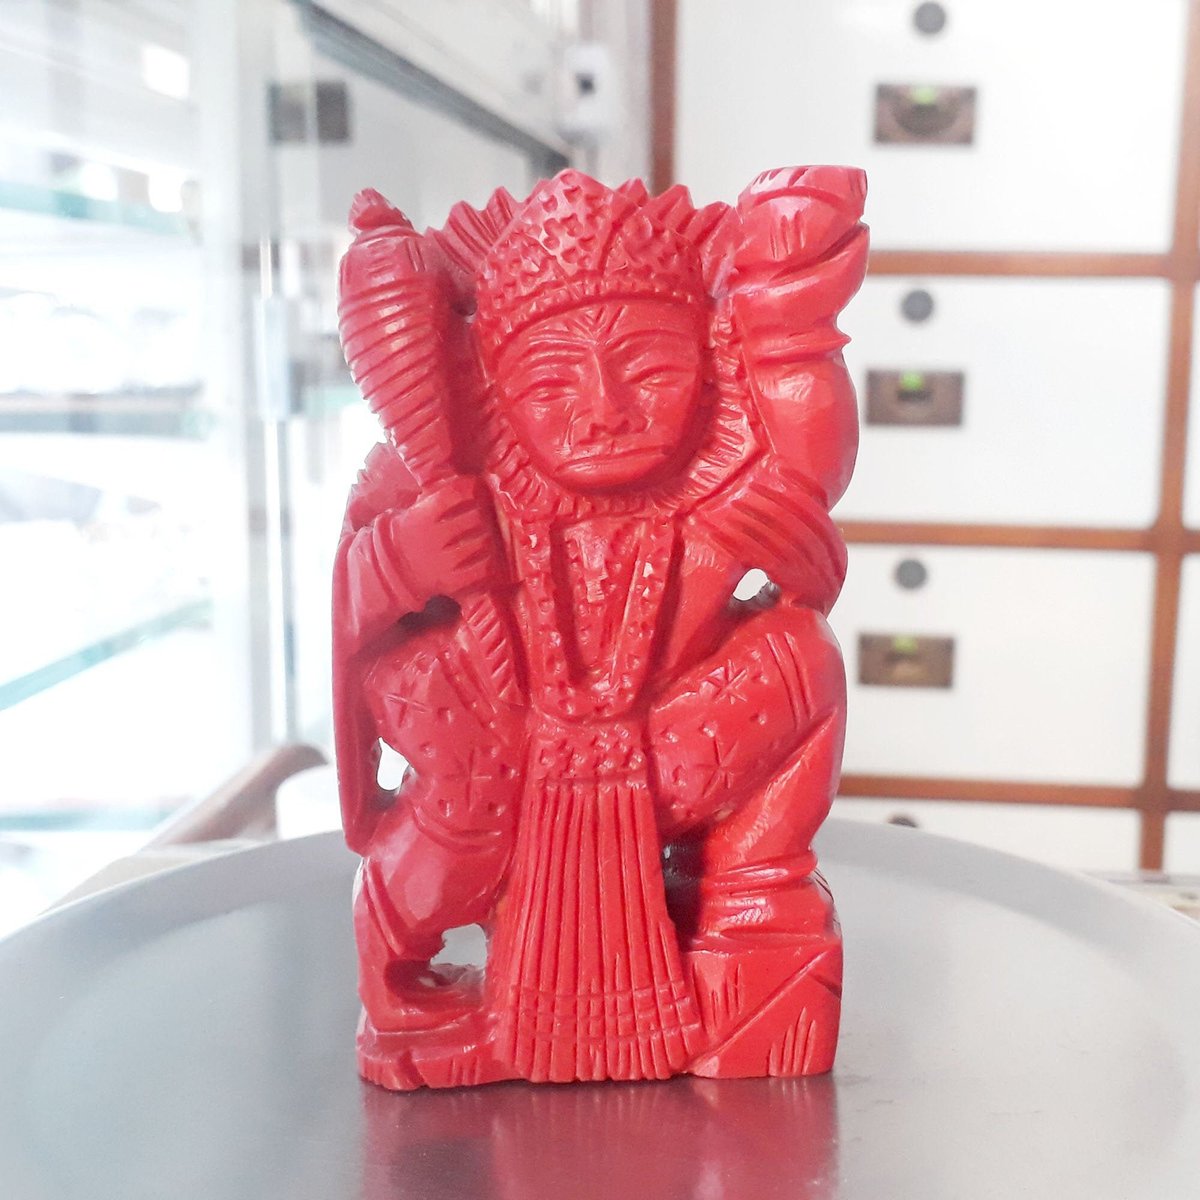 Red synthetic coral handmade Hanuman ji statue Elegant Statue of Bhagwan Hanuman Coral Sculptures Carving Figurine etsy.me/3OZLDIl #red #engagement #easter #gemstonefigure #antiquecollection #statues #figurine